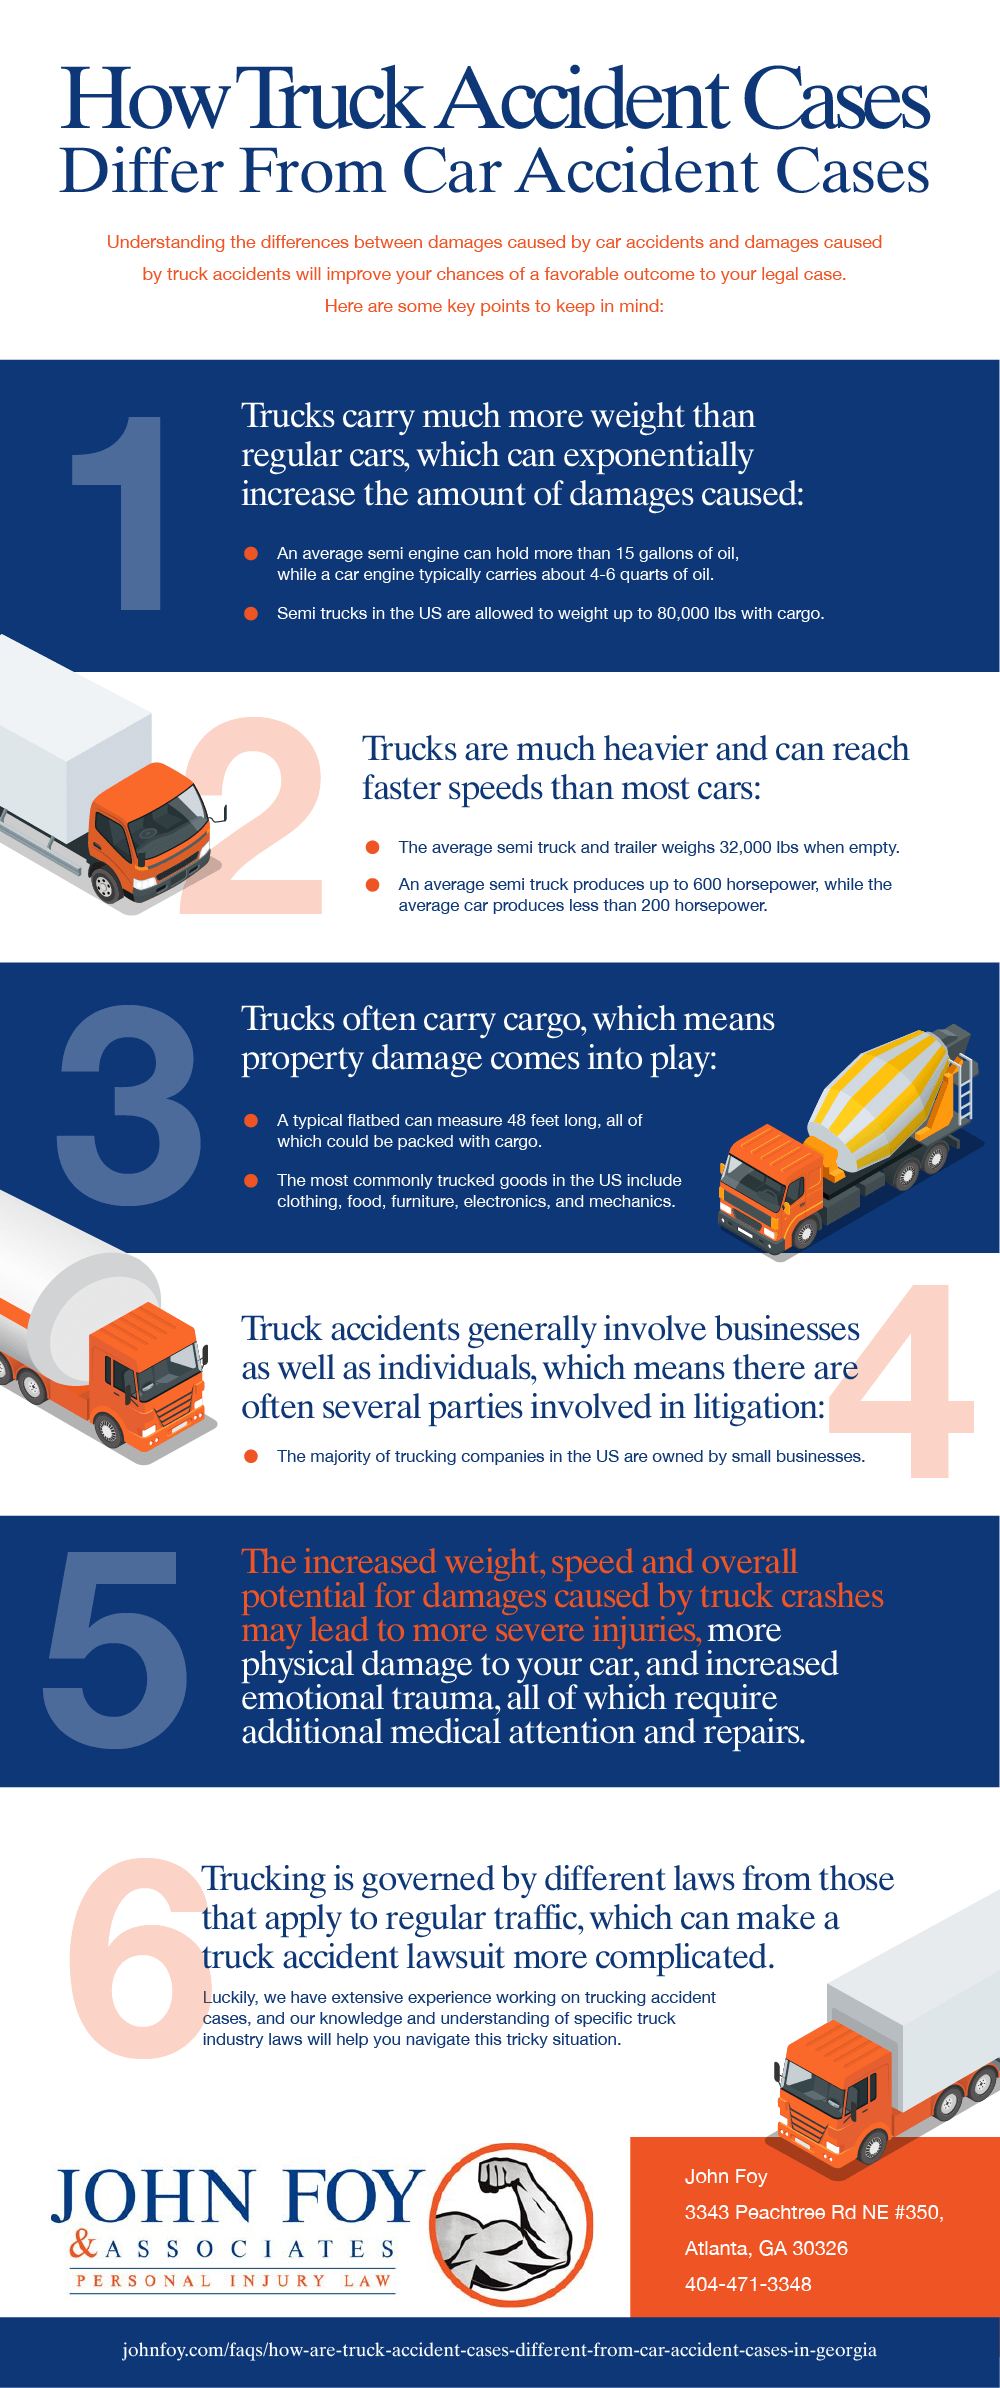 How-Truck-Accident-Cases-Differ-From-Car-Accident